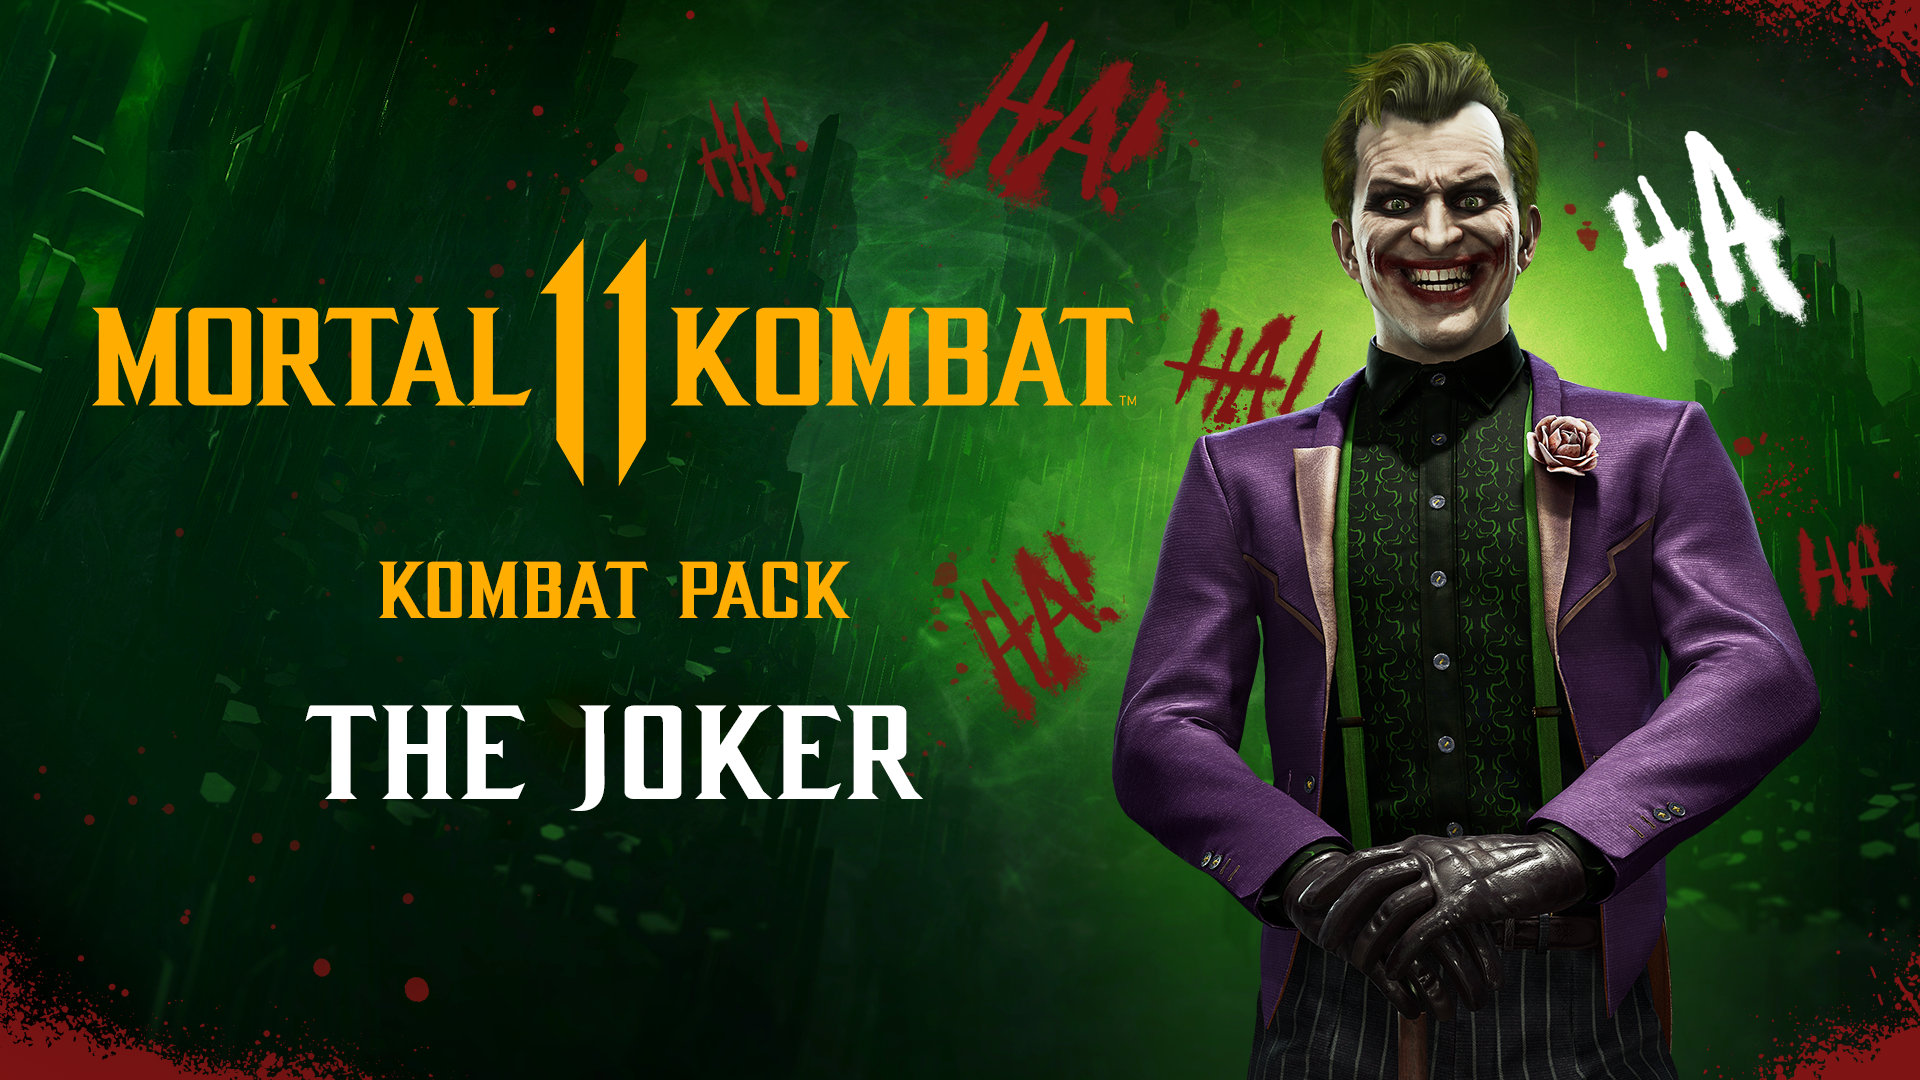 The Comics Console: DC’s Joker Enters Outworld In New Mortal Kombat 11 Gameplay Trailer!